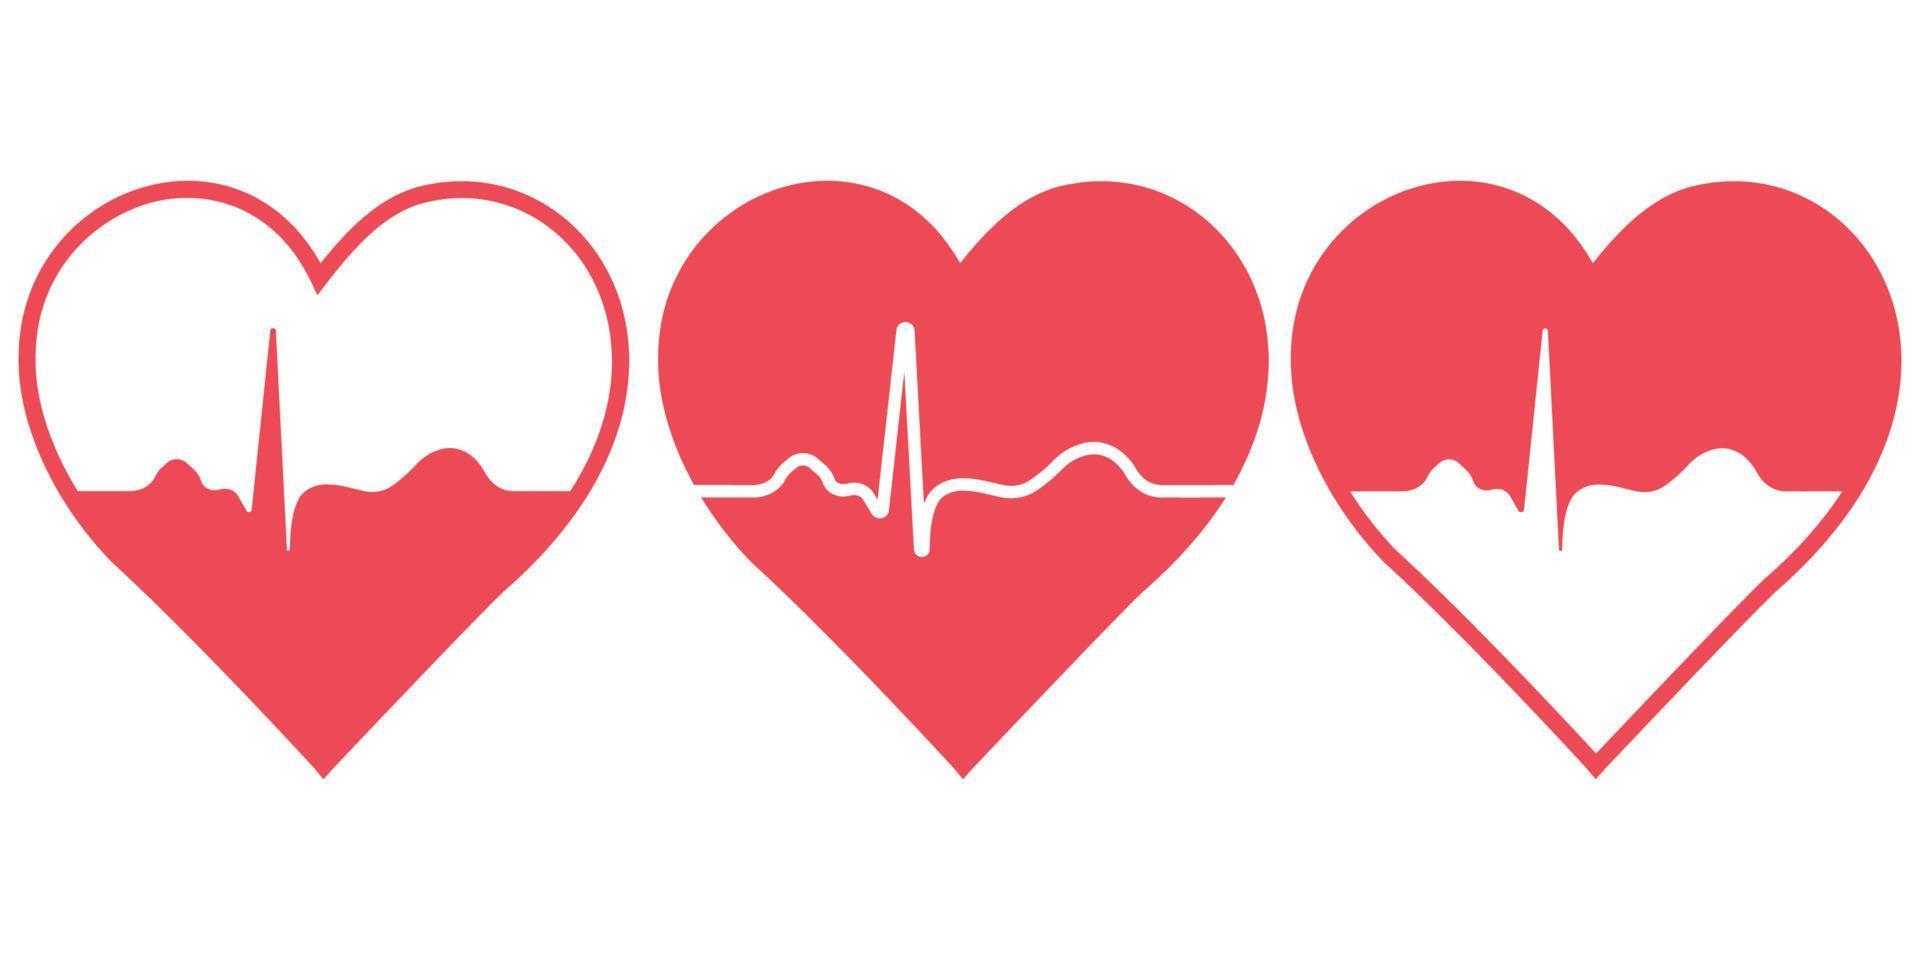 Set of hearts with blood pulse, vector icons symbol of health, sign healthy lifestyle heart in good shape